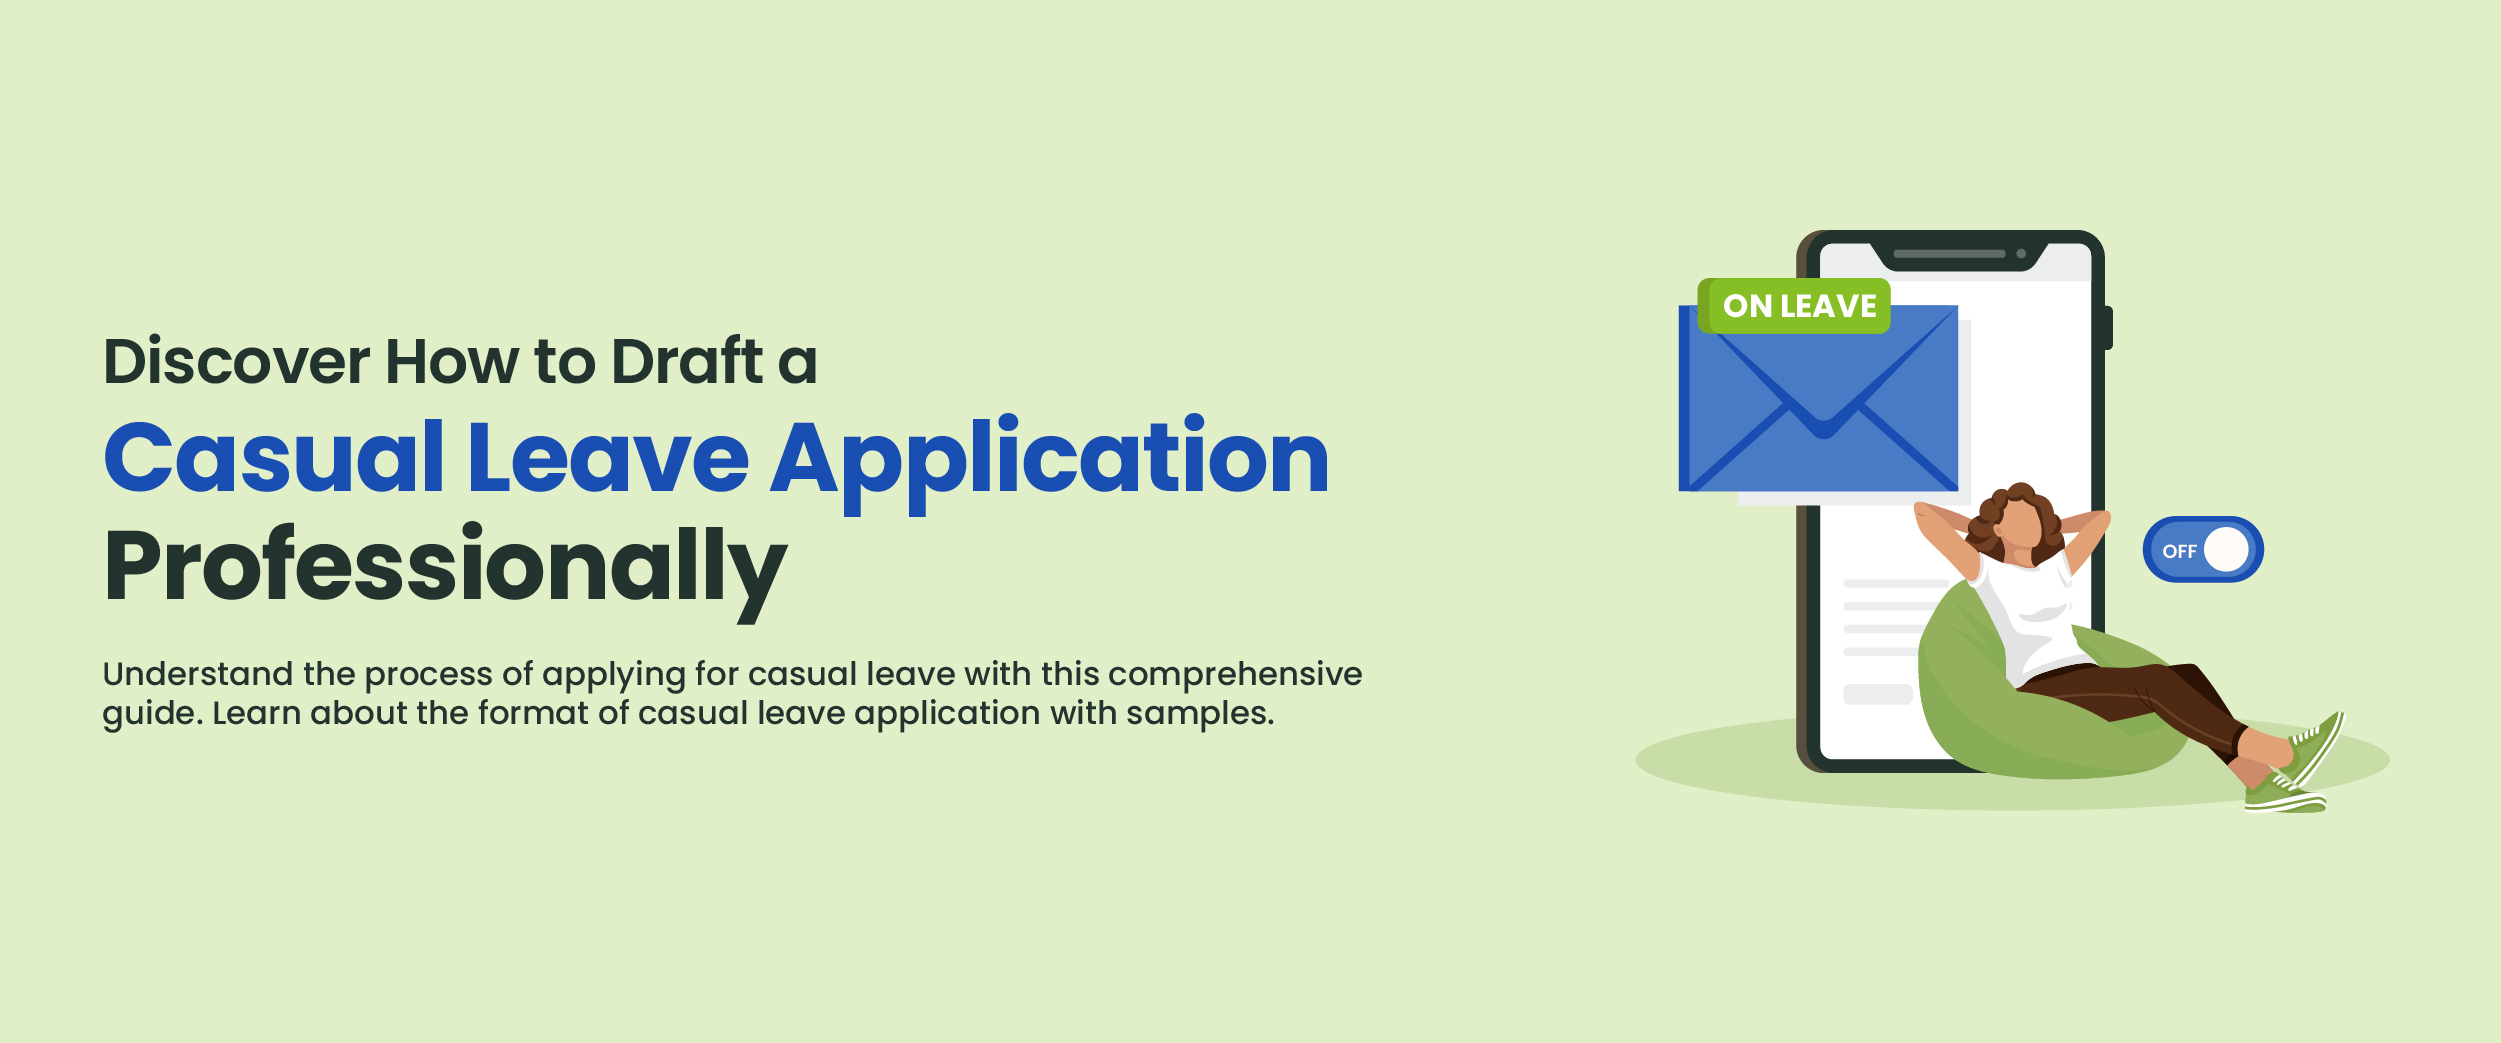 Discover How to Draft a Casual Leave Application Professionally